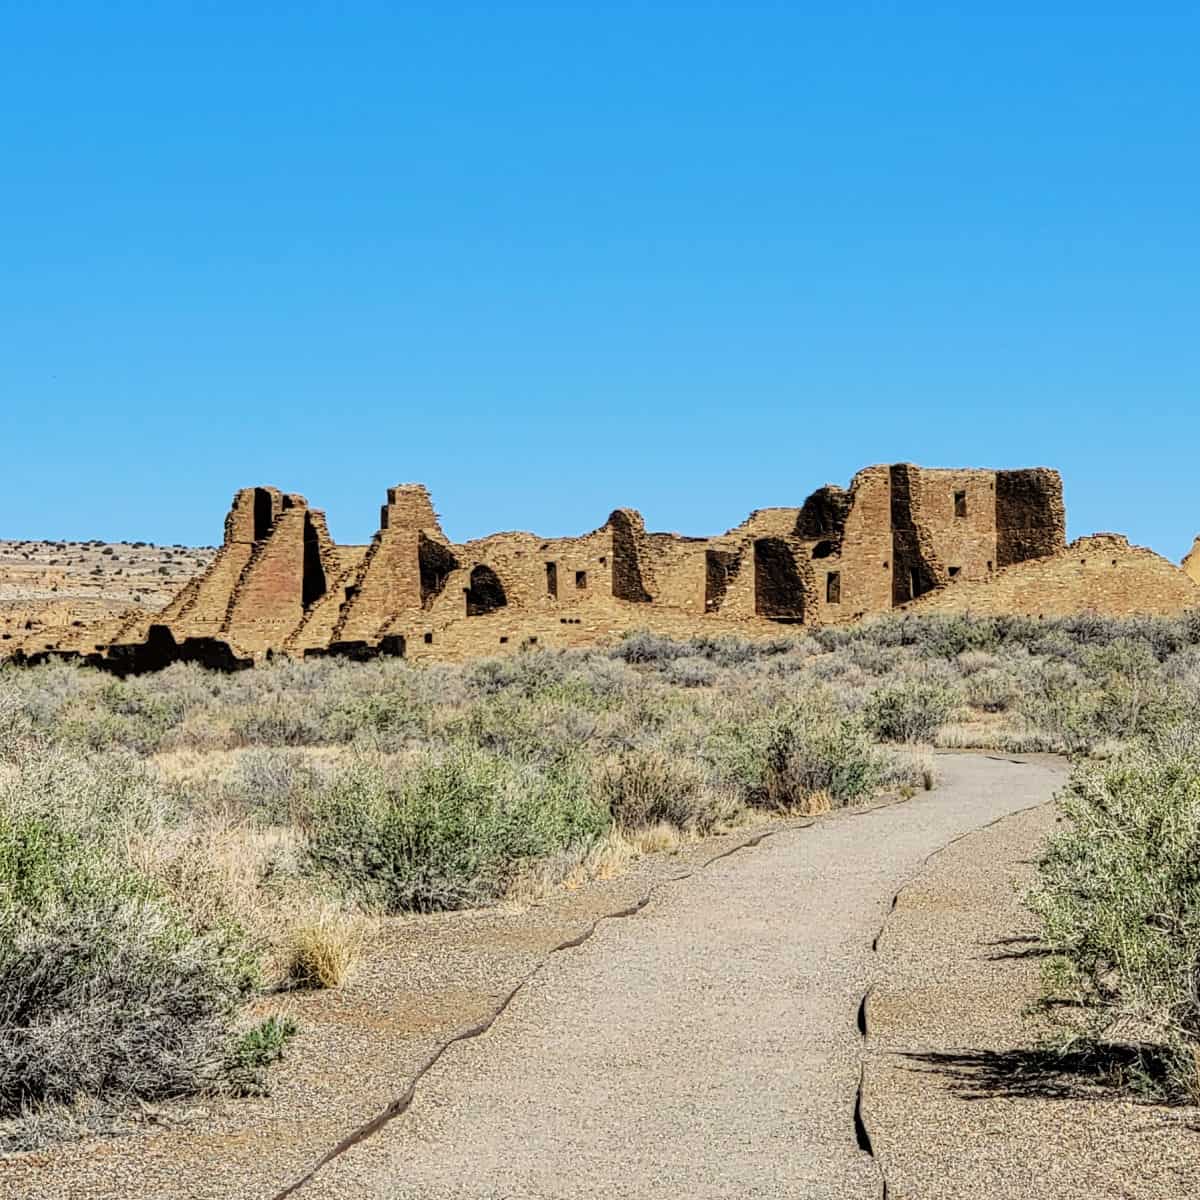 Trail leading to Pueblo Bonito at Chaco Culture National Historical Park